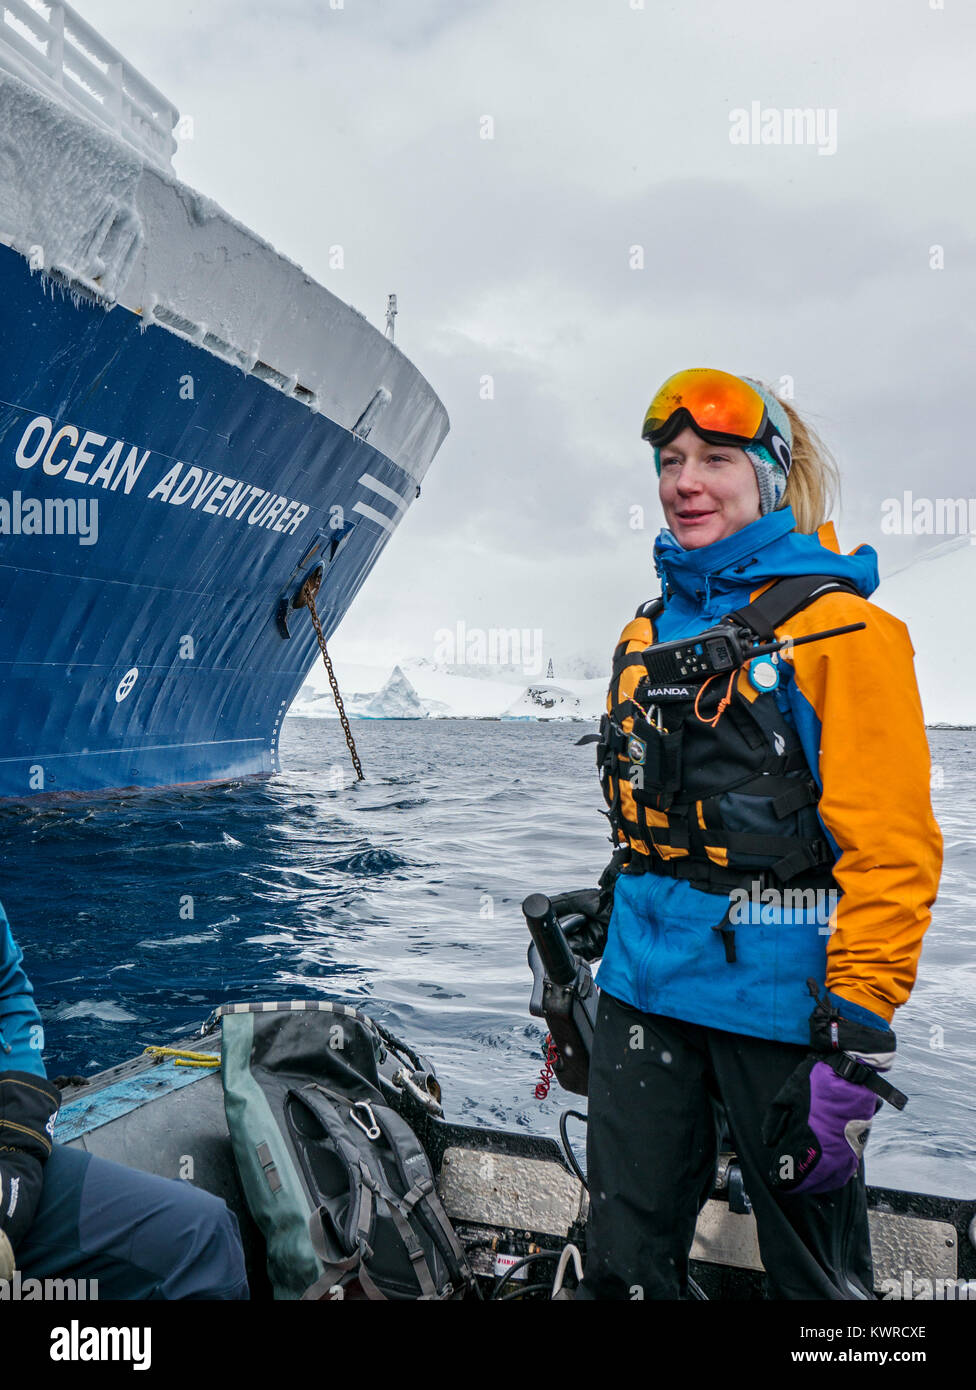 Guide & naturalist drives large inflatable Zodiac boat to shuttle alpine mountaineering skiers to Antarctica from the passenger ship Ocean Adventurer; Stock Photo